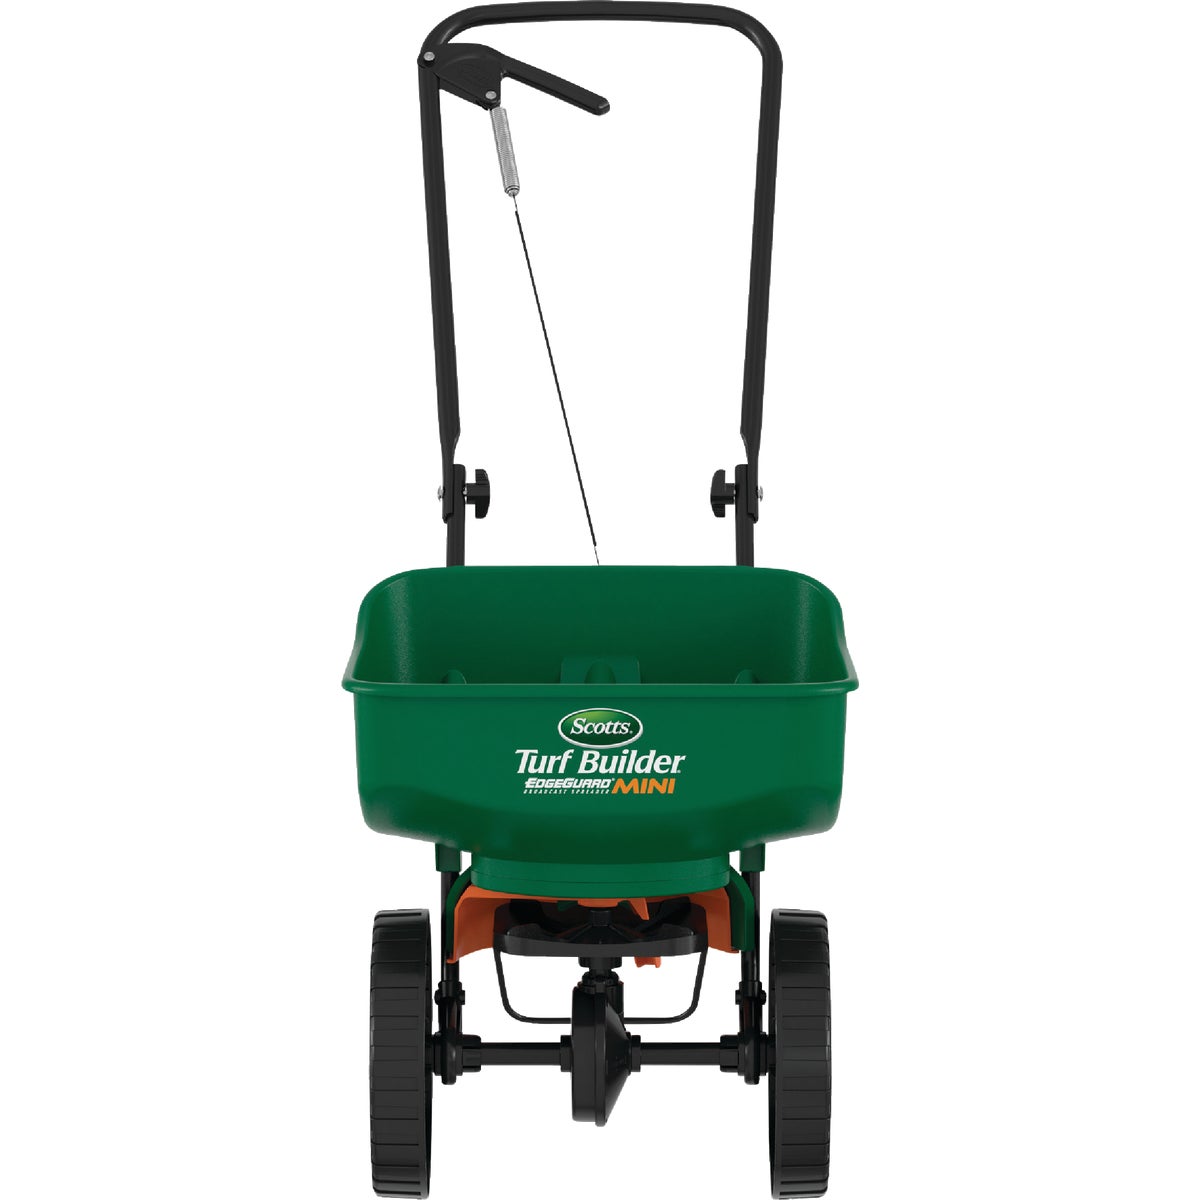 Item 764308, Small scale spreader holds up to 5000 Sq. Ft. of Scotts lawn products.